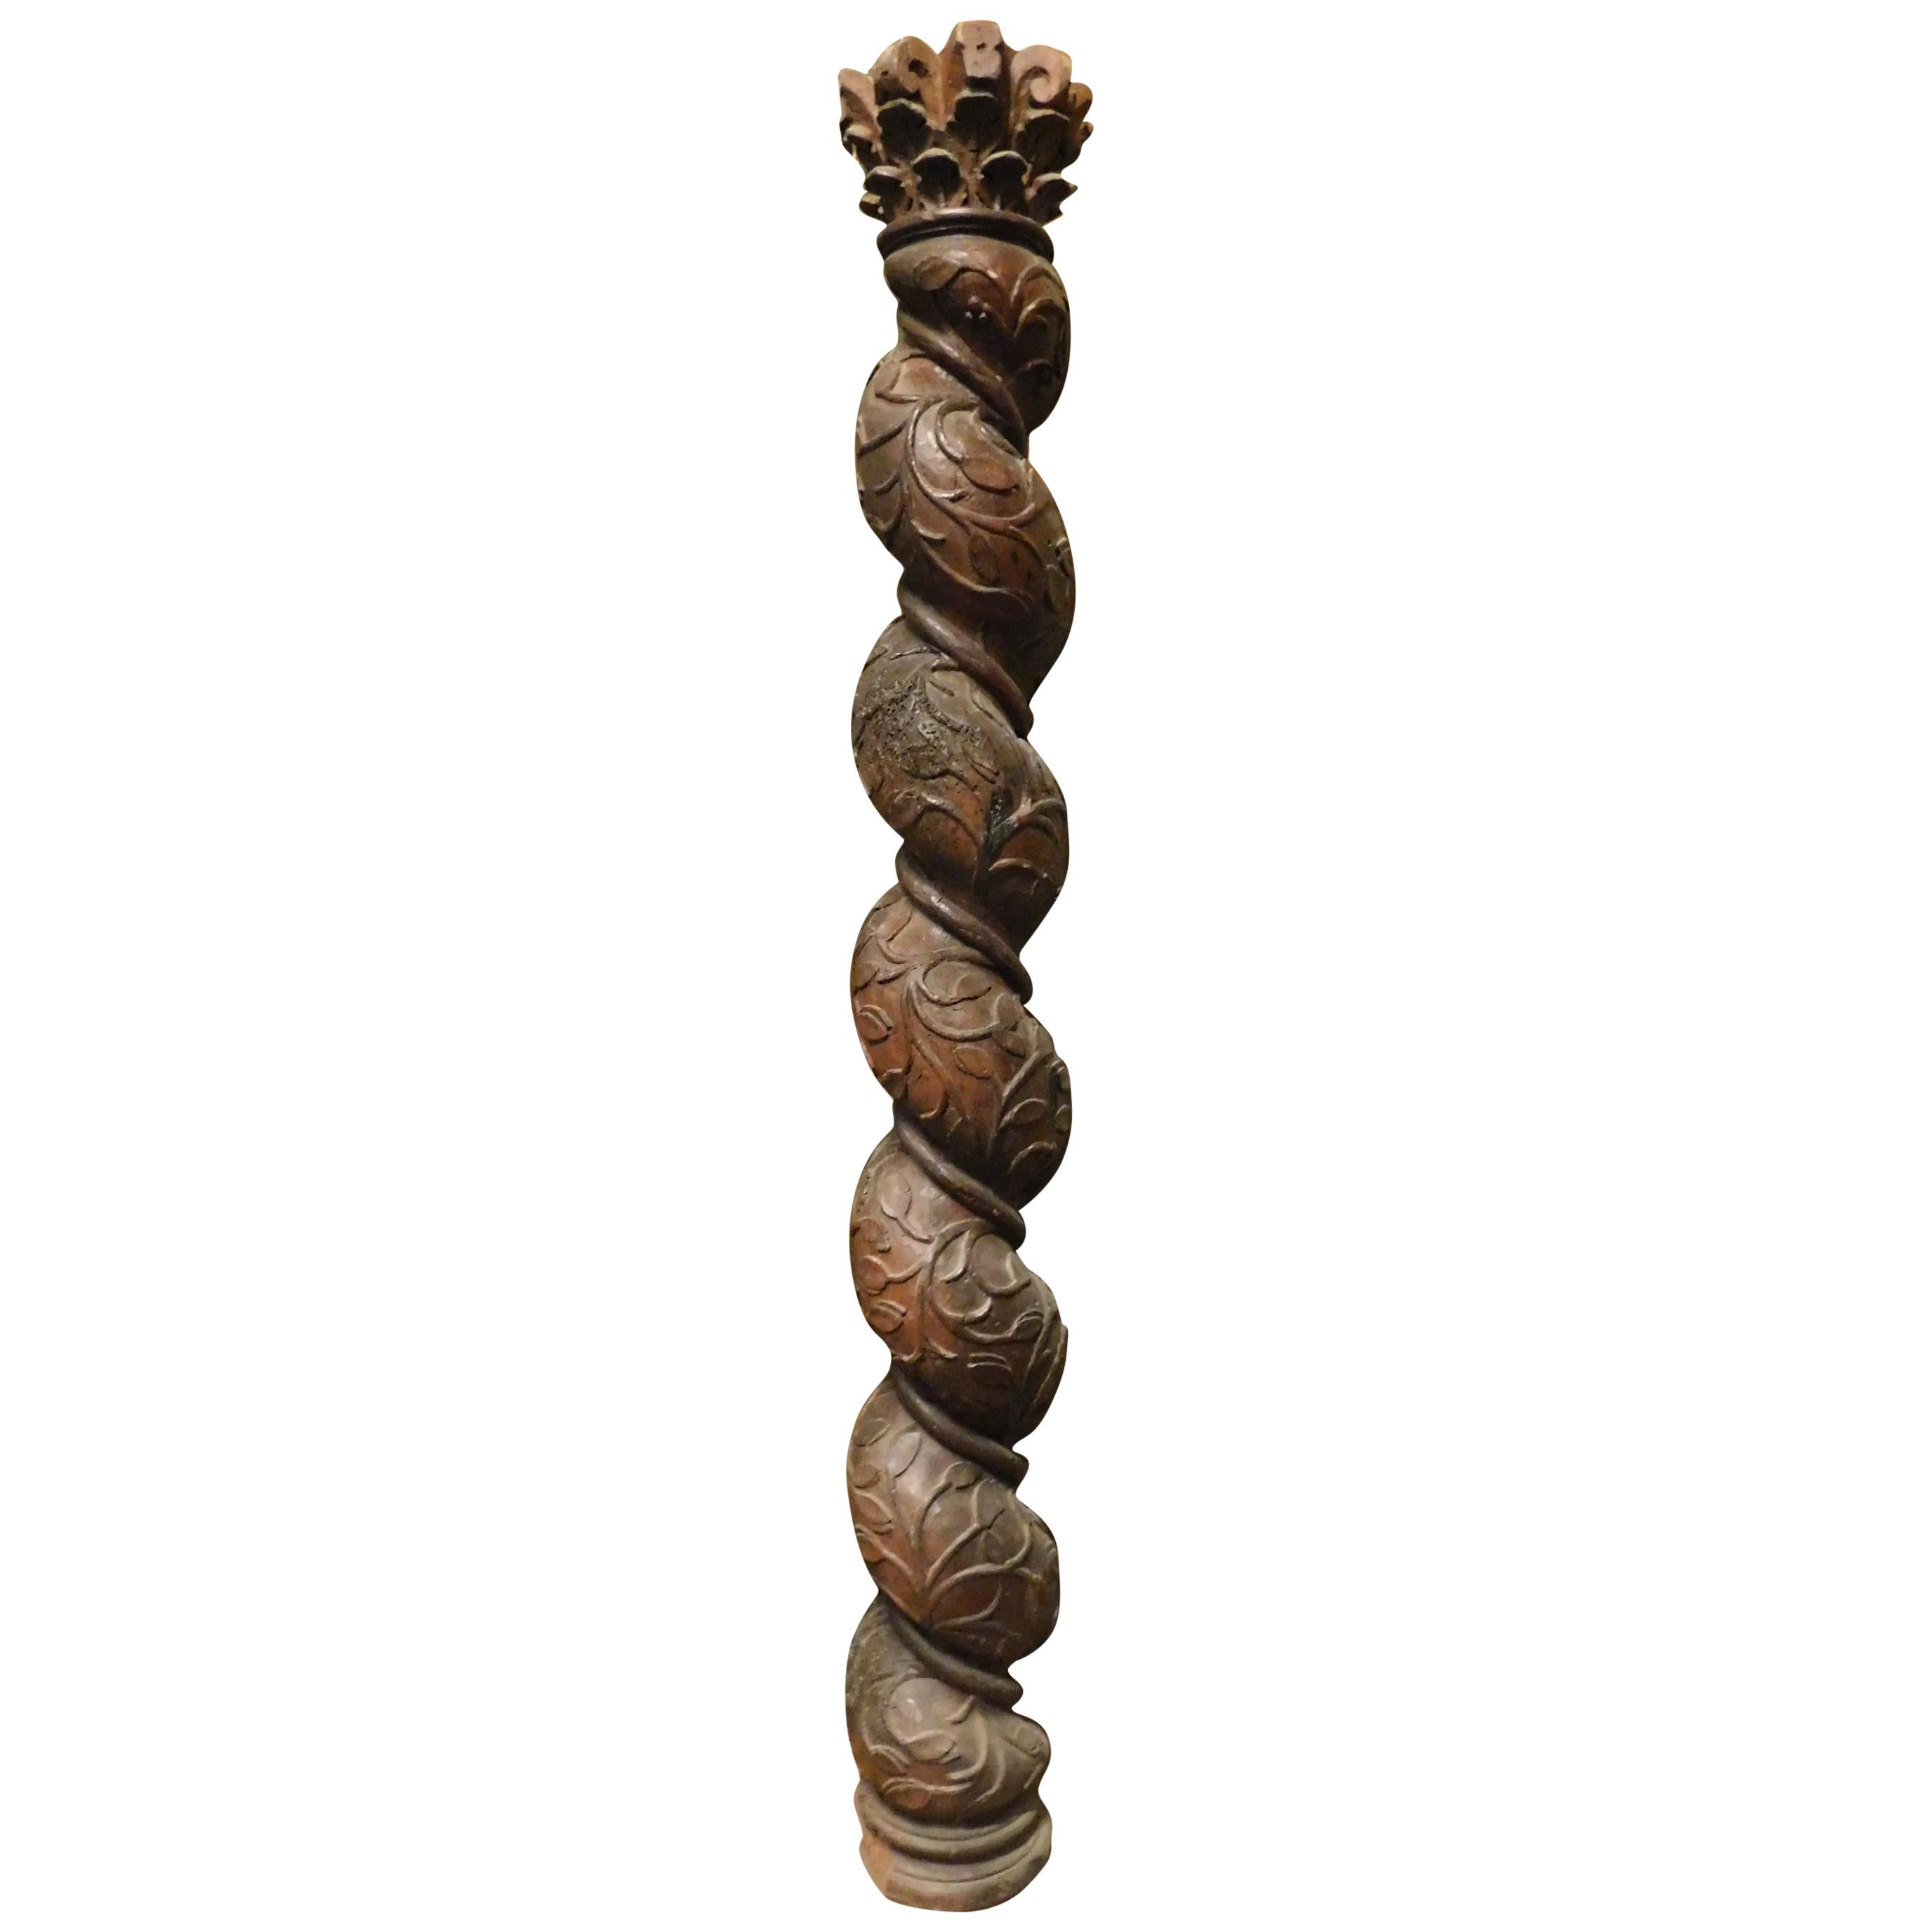 Antique Column in Walnut Wood, with Twisted Sculpted, 17th Century Italy